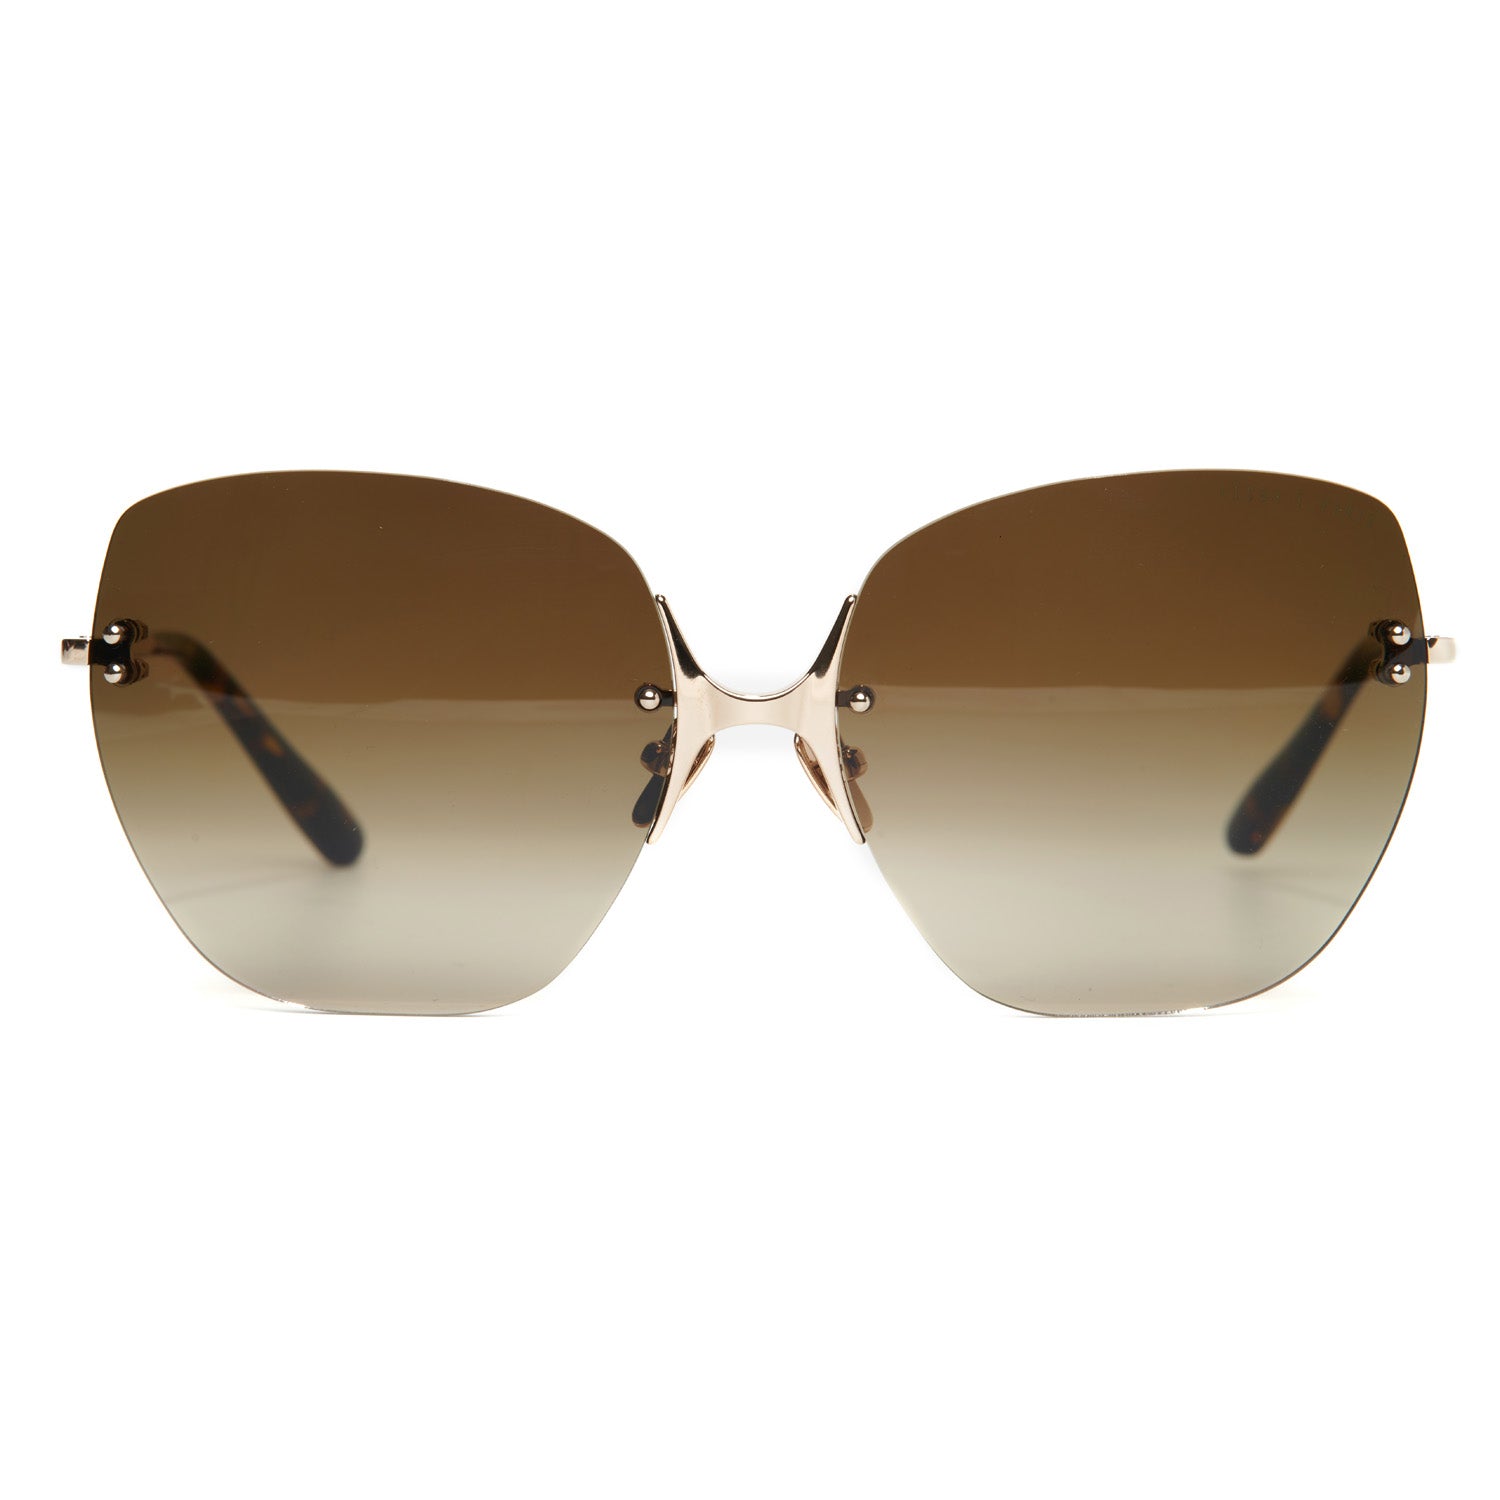 NWT GUCCI GG0352/S PINK GOLD RIMLESS SUNGLASSES | Sunglasses, Rimless  sunglasses, Gucci models